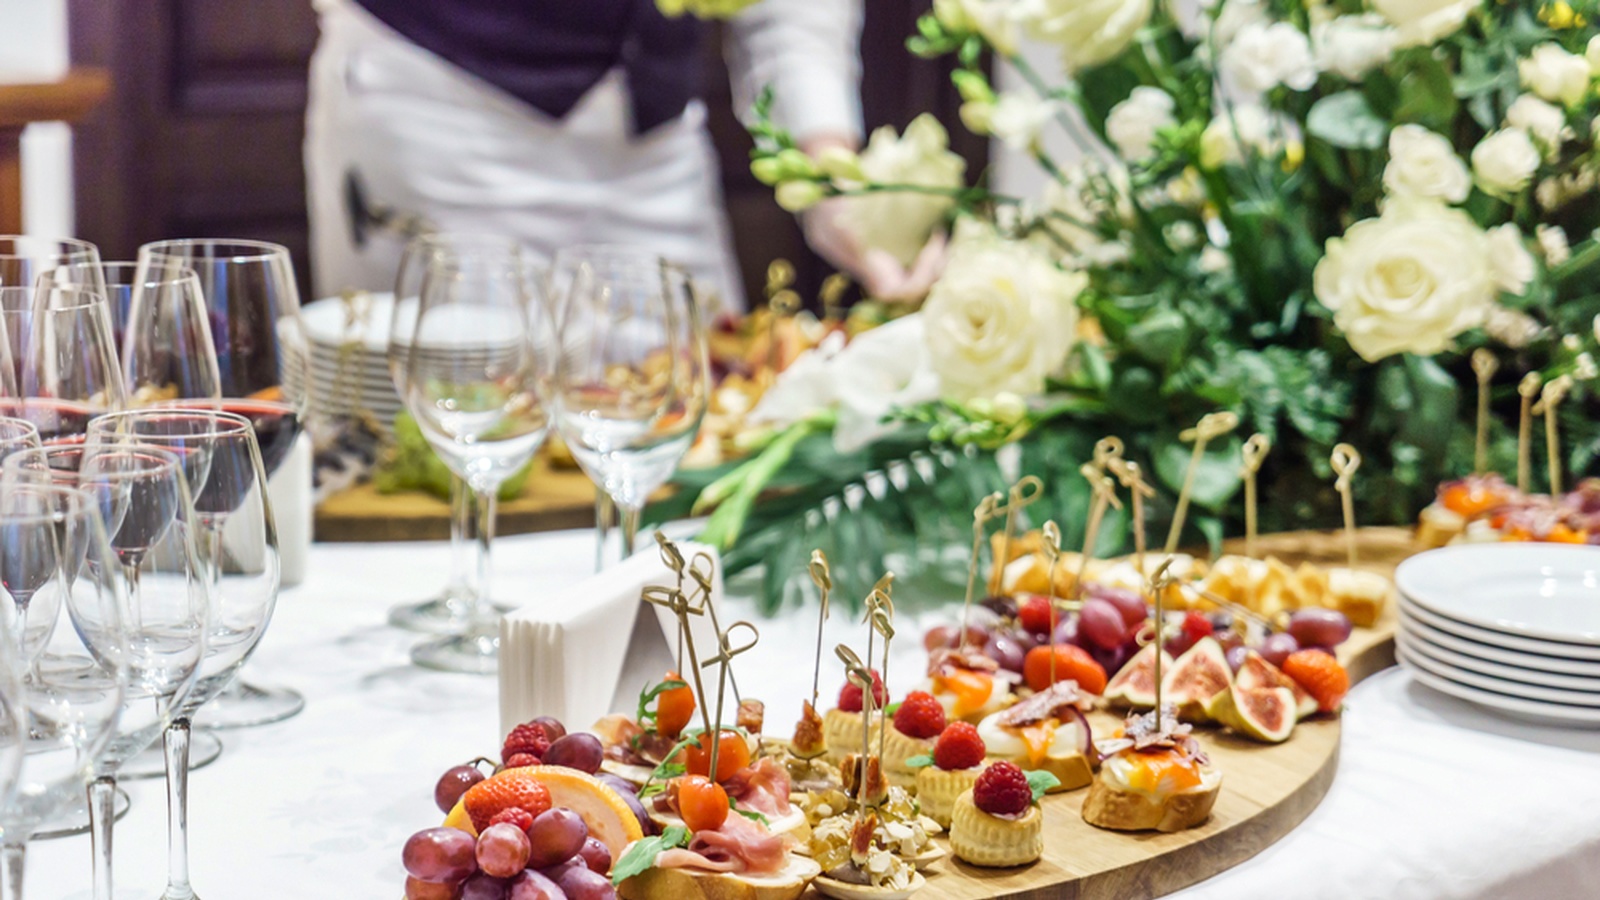 5 Ways To Politely Decline Holiday Party Goodies